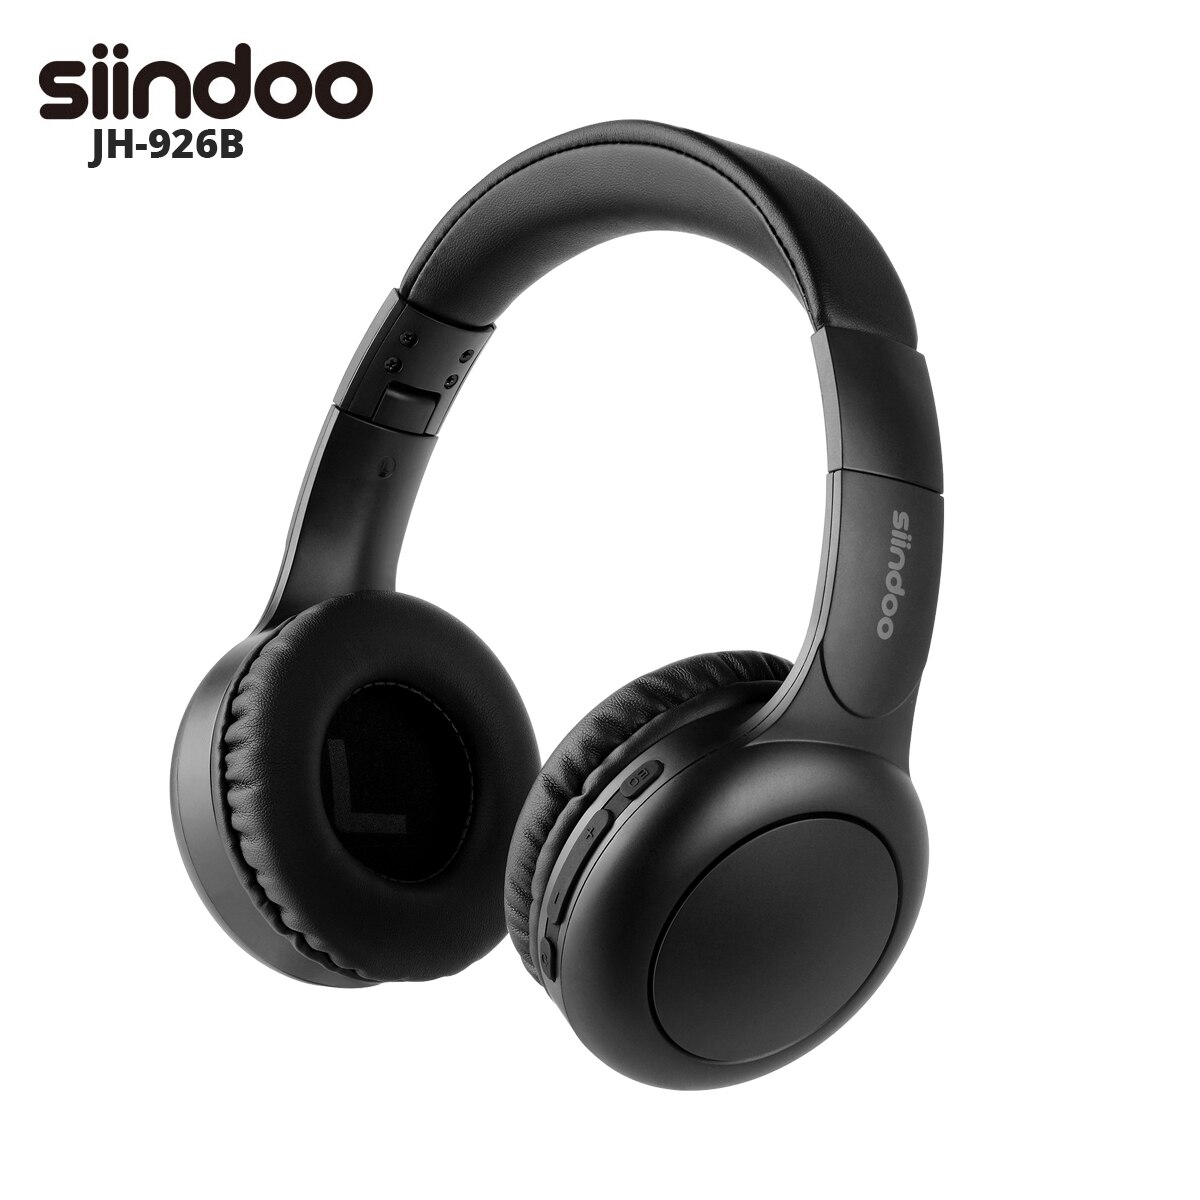 Siindoo JH-926B Wireless Bluetooth Headphones Over Ear Foldable Lightweight Headset with Mic 3 EQ Modes for Kids Teenager